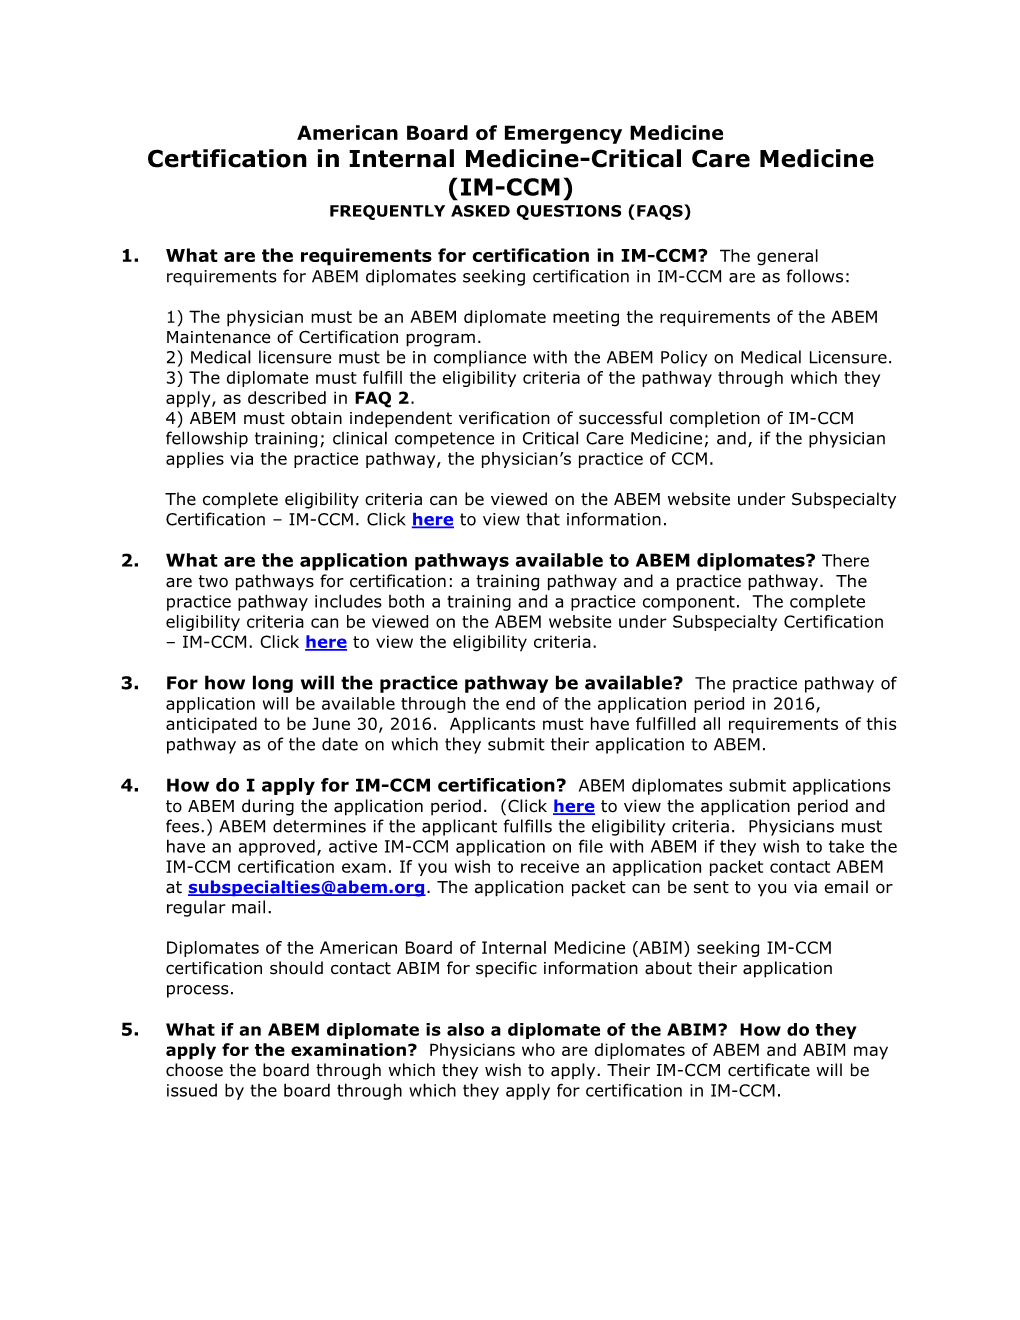 Certification in Internal Medicine-Critical Care Medicine (IM-CCM) FREQUENTLY ASKED QUESTIONS (FAQS)